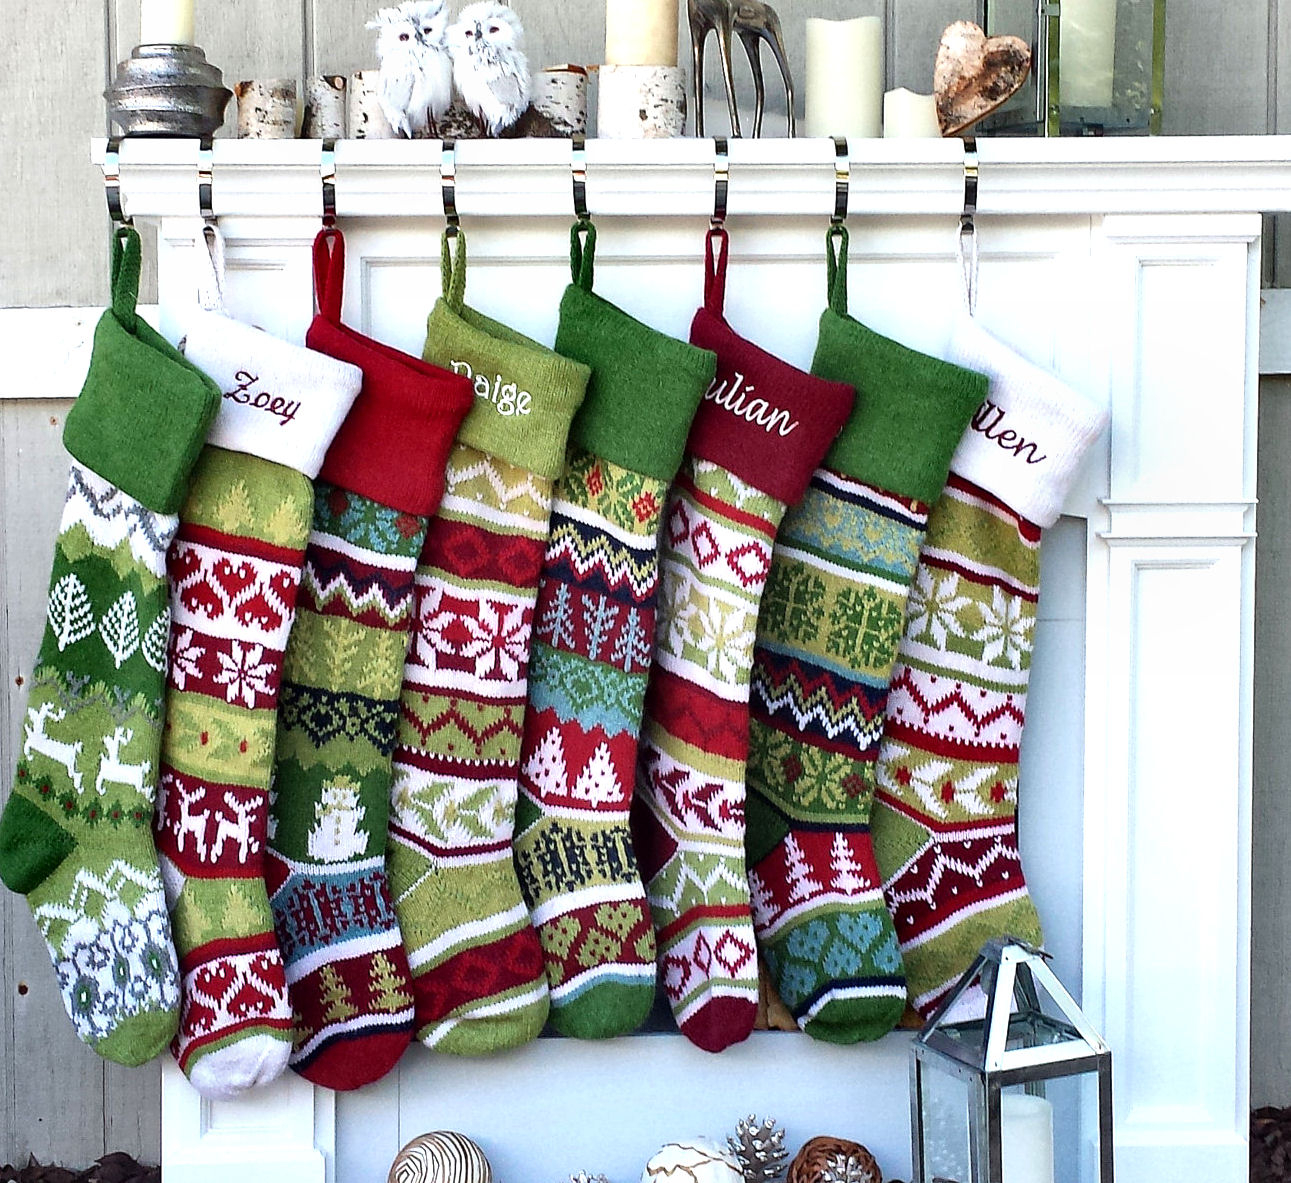 Knitted Christmas Stocking Patterns Personalized Fair Isle Knitted Christmas Stockings